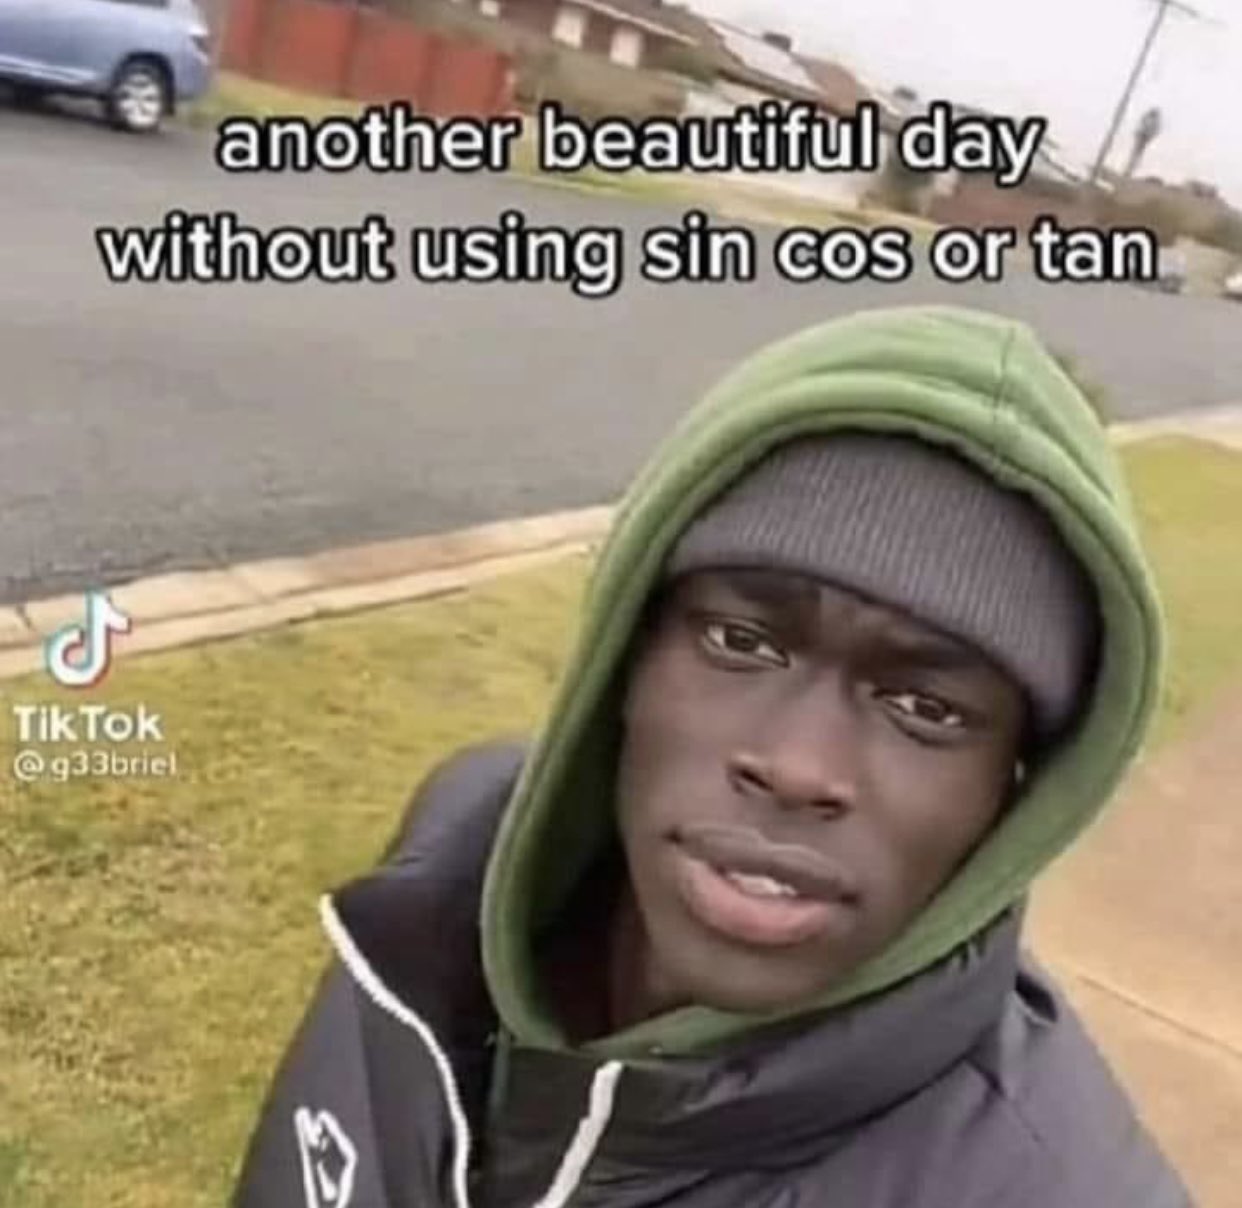 dudes posting their Ws - another beautiful day without sin cos tan - another beautiful day without using sin cos or tan J Tik Tok